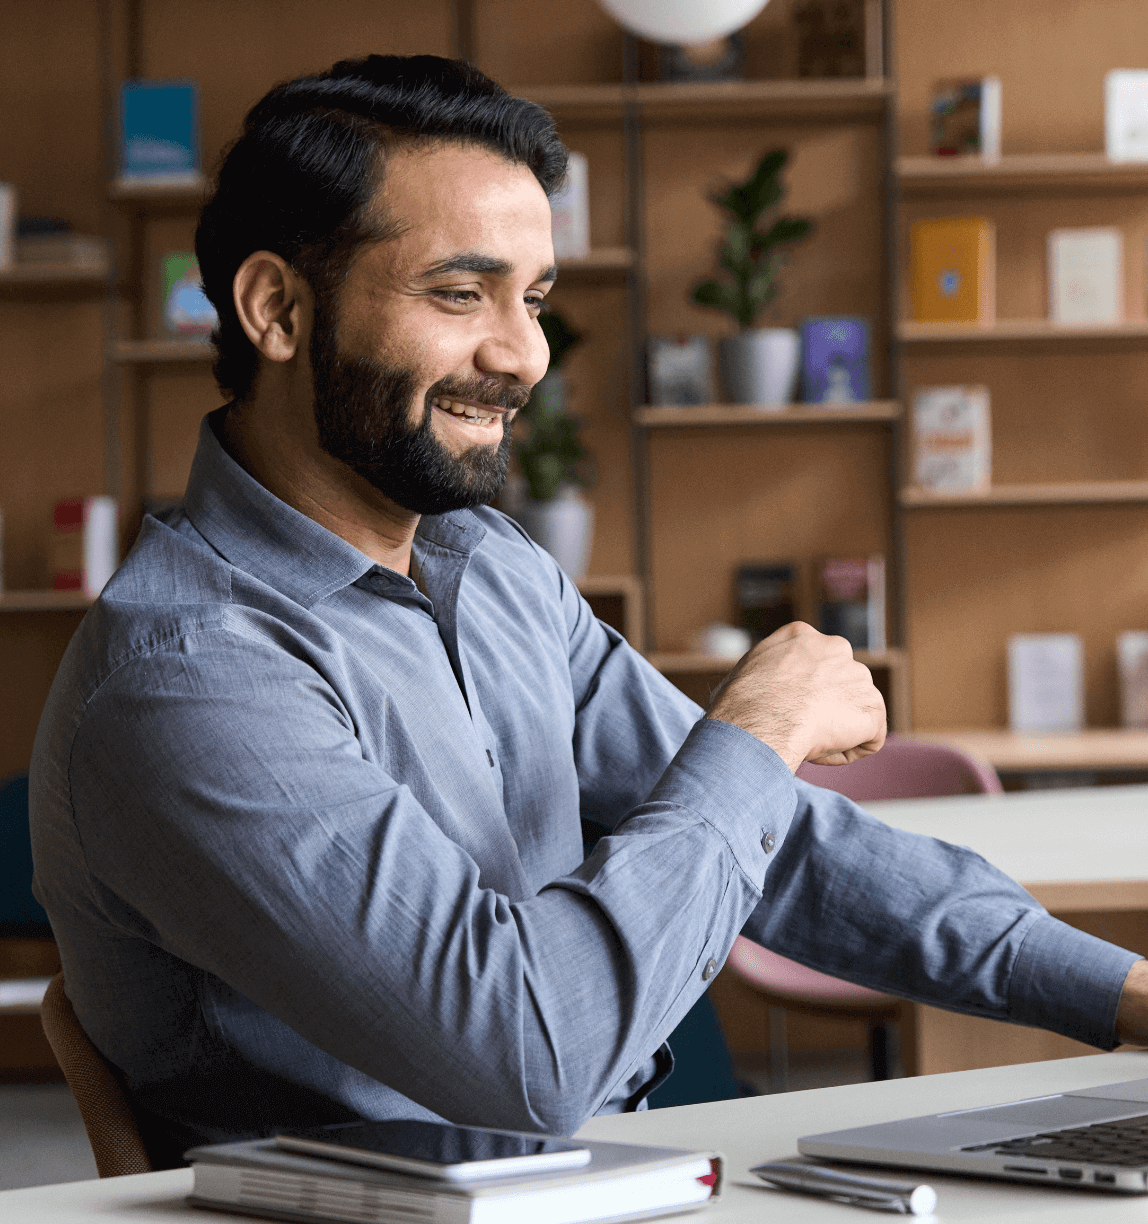 Man smiling and looking at laptop.